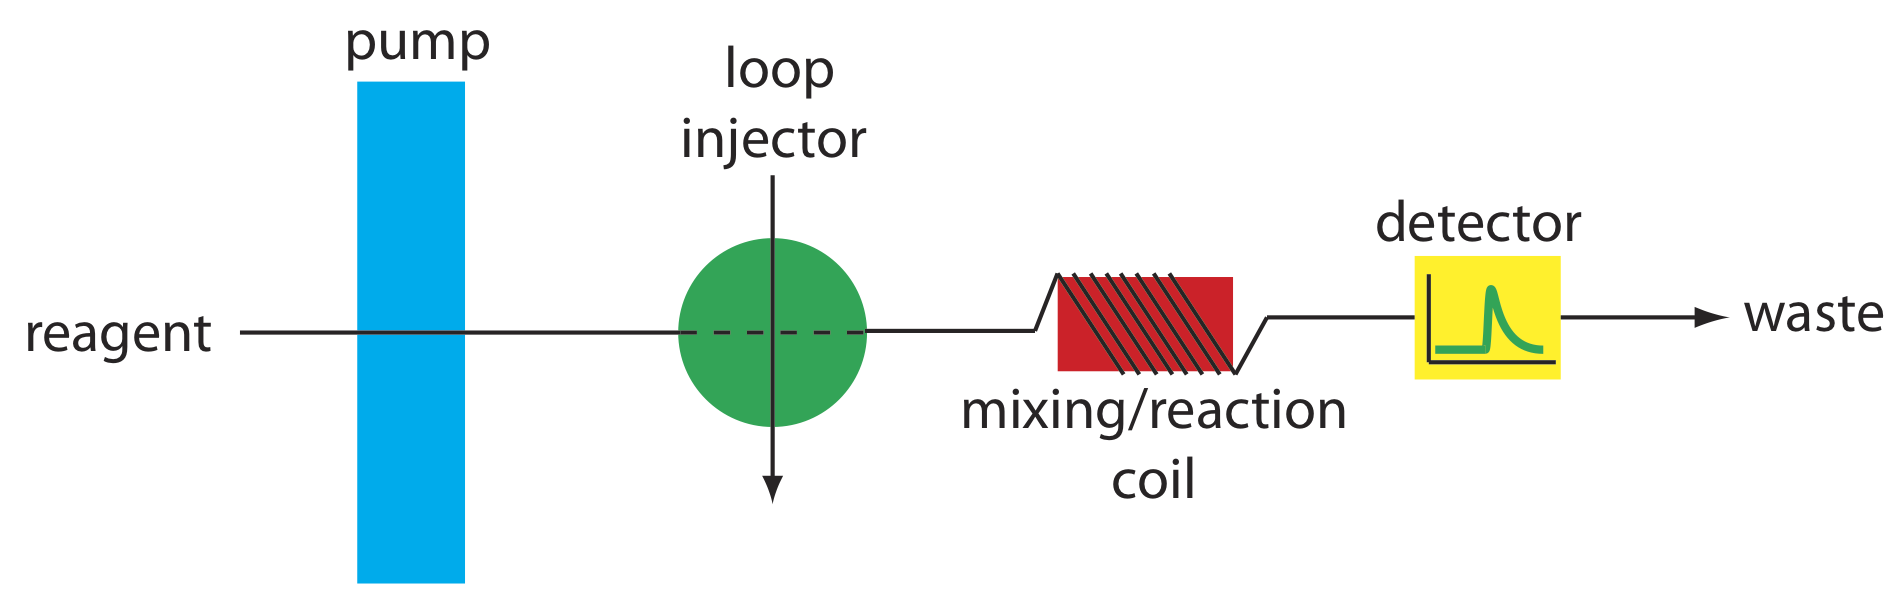 The single manifold pushes reagent through a pump, then a loop injector, to a mixing/reacting coil, then to a detector and ending with waste.